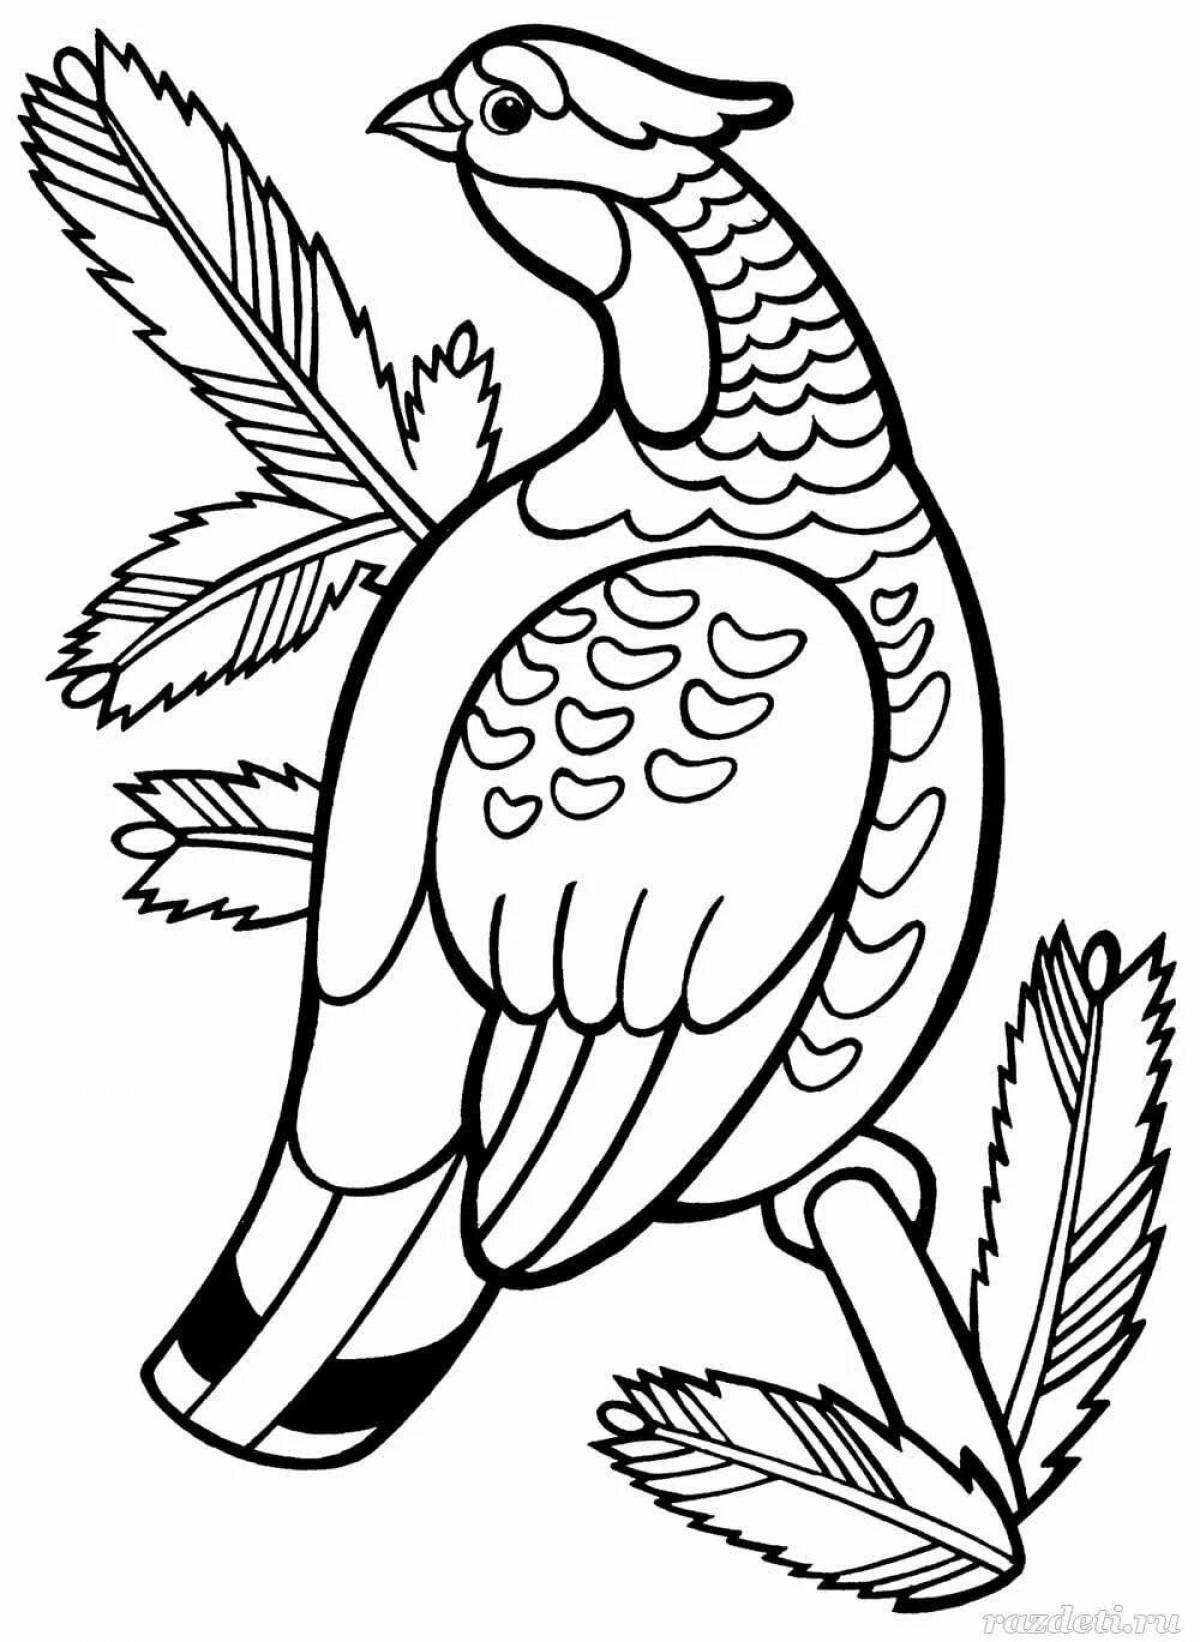 Brilliant grouse and fox coloring book